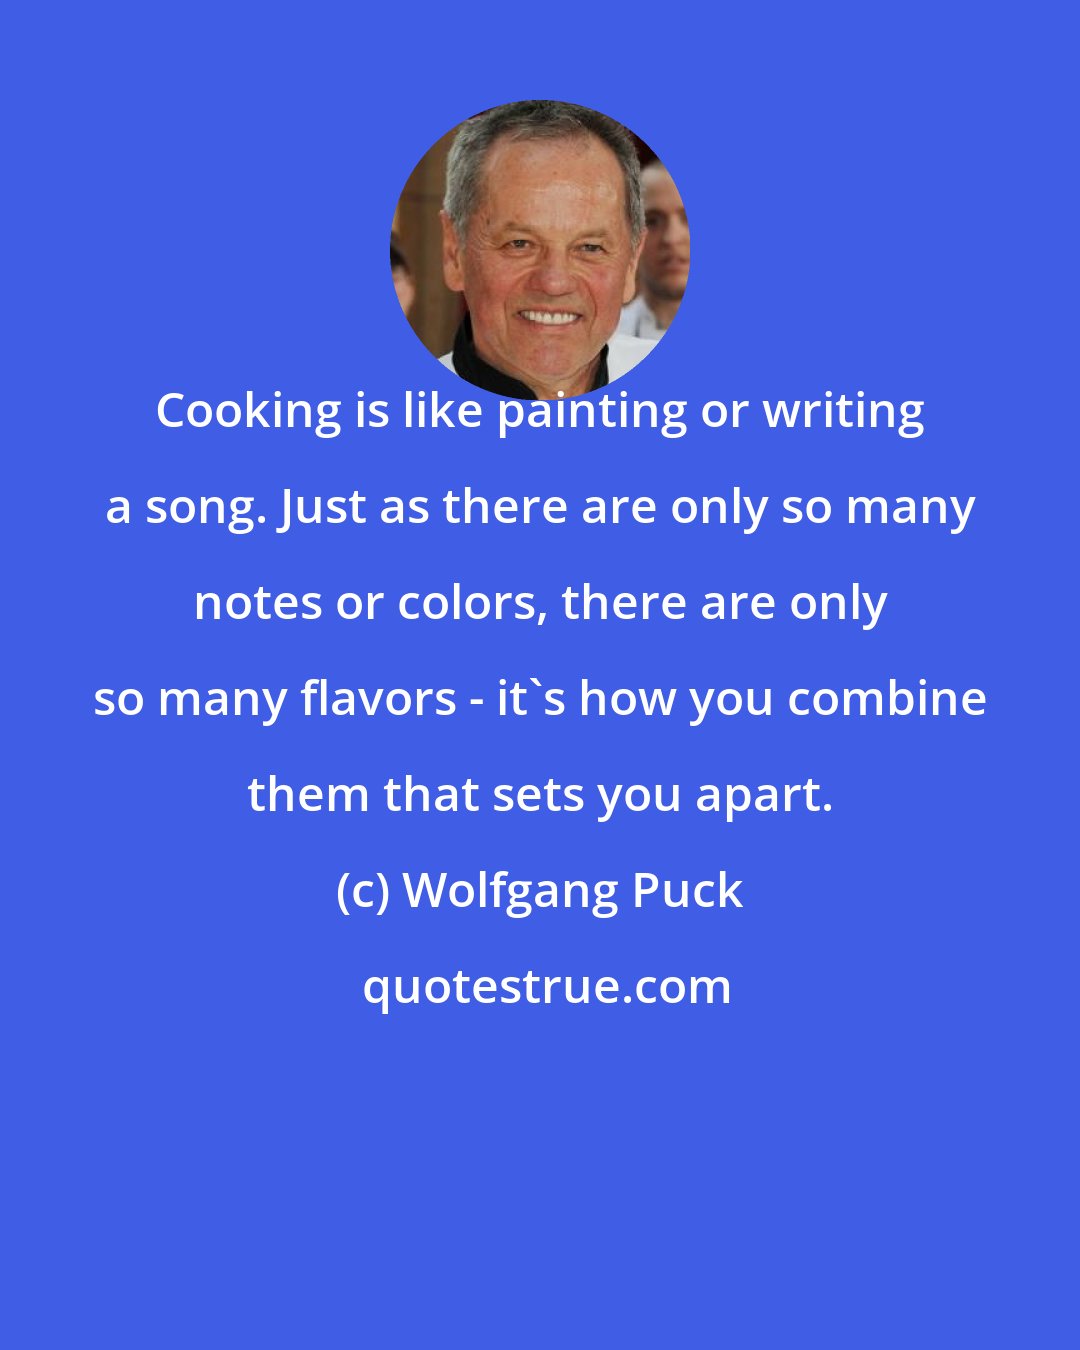 Wolfgang Puck: Cooking is like painting or writing a song. Just as there are only so many notes or colors, there are only so many flavors - it's how you combine them that sets you apart.